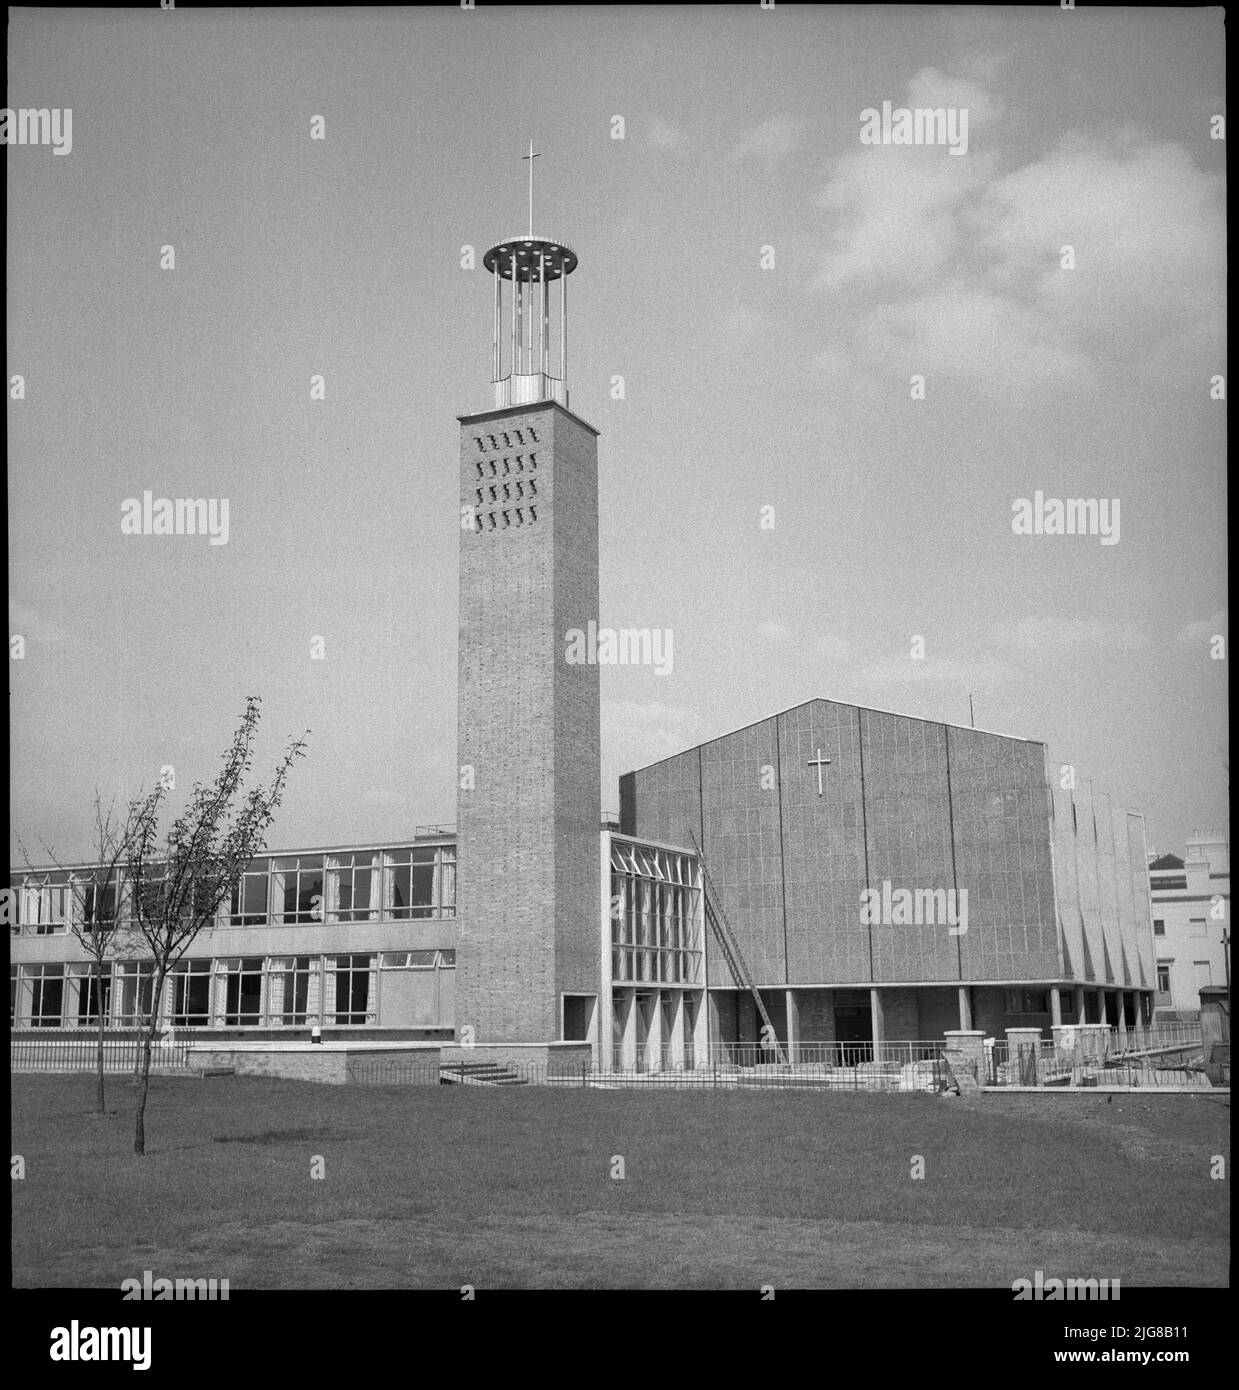 Trinity Congregational Church, East India Dock Road, Lansbury Estate, Tower Hamlets, Greater London Authority, 1951. View from the west of Trinity Congregational Church and Hall, now Trinity Methodist Church. Trinity Congregational Church (later Trinity Methodist Church), was built in 1950-51 by Cecil Handisyde and D Rogers Stark. The building was part of the 'Live' Architecture exhibition at the Festival of Britain in 1951. Stock Photo